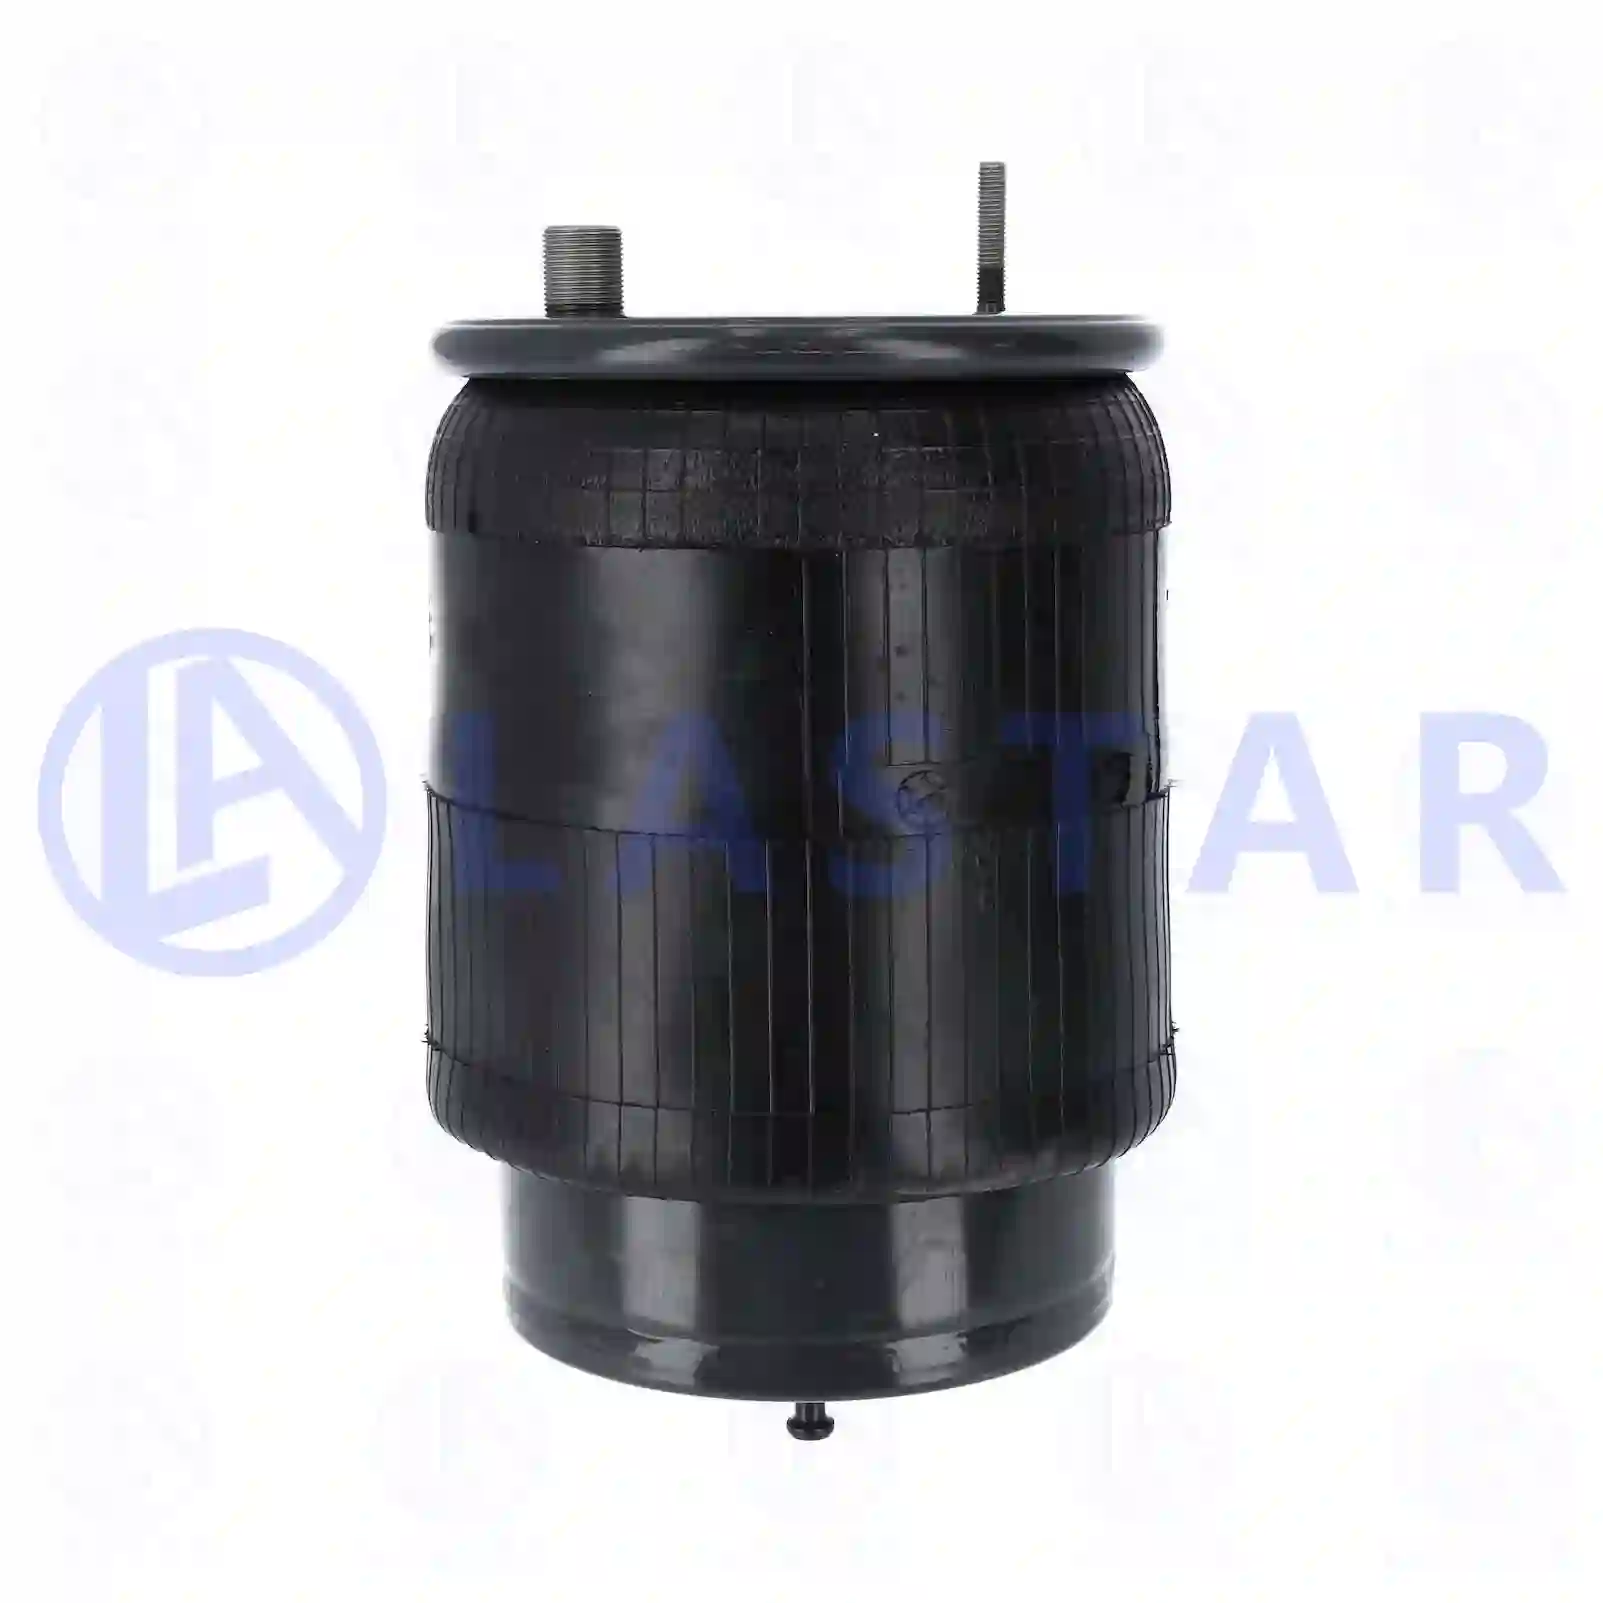 Air spring, with steel piston, 77729675, 21321515, ZG40766-0008 ||  77729675 Lastar Spare Part | Truck Spare Parts, Auotomotive Spare Parts Air spring, with steel piston, 77729675, 21321515, ZG40766-0008 ||  77729675 Lastar Spare Part | Truck Spare Parts, Auotomotive Spare Parts